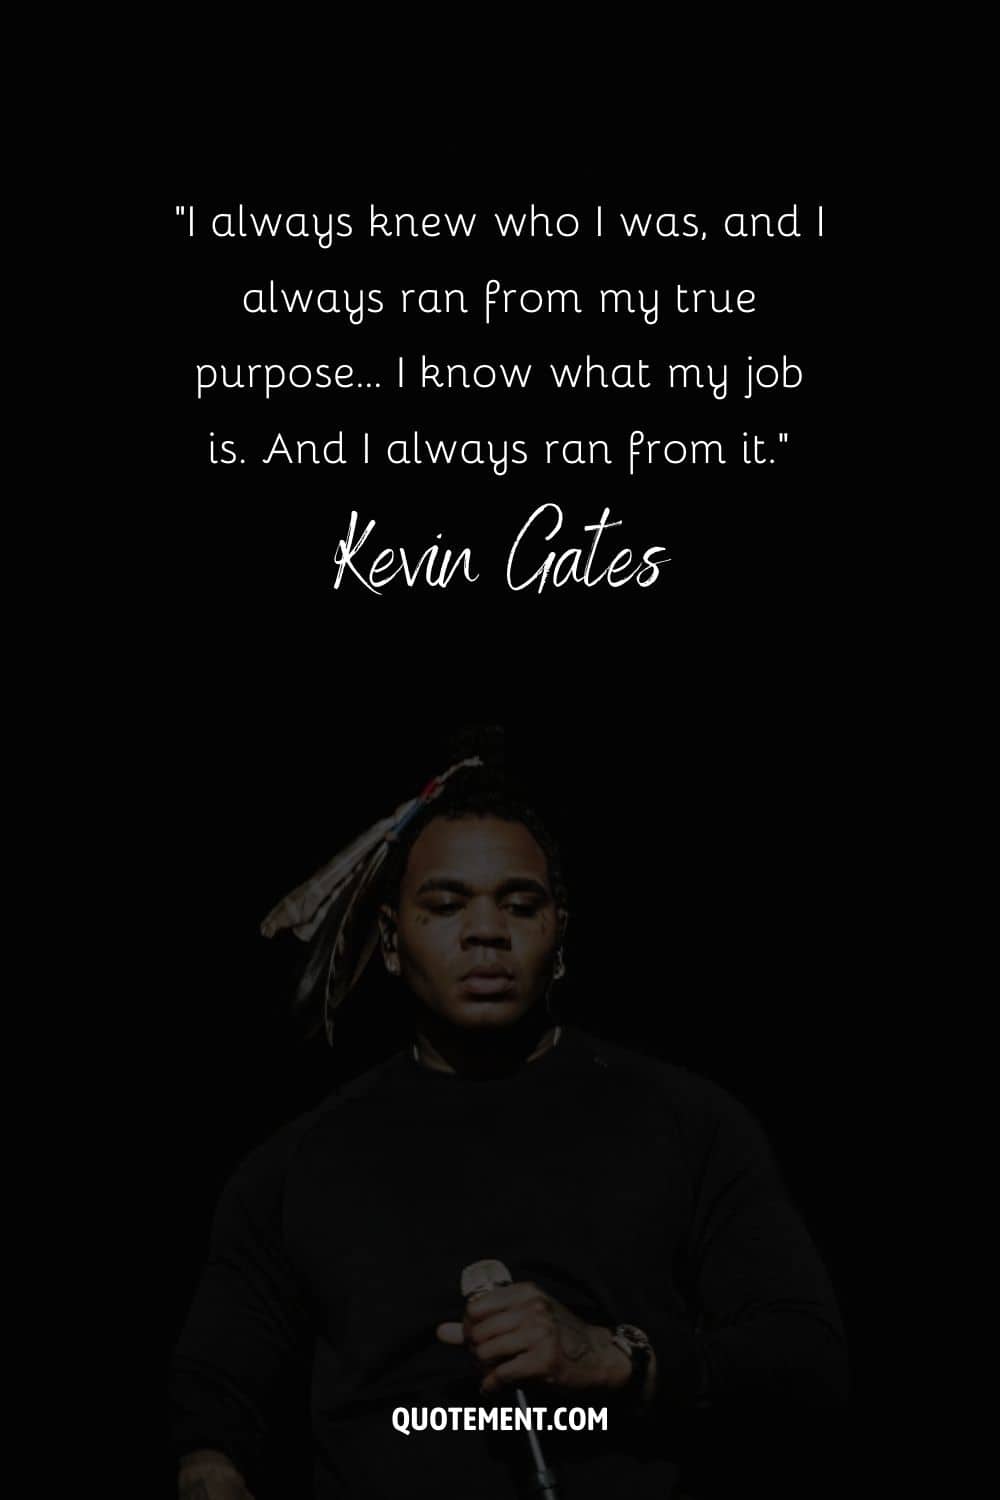 “I always knew who I was, and I always ran from my true purpose… I know what my job is. And I always ran from it.” – Kevin Gates